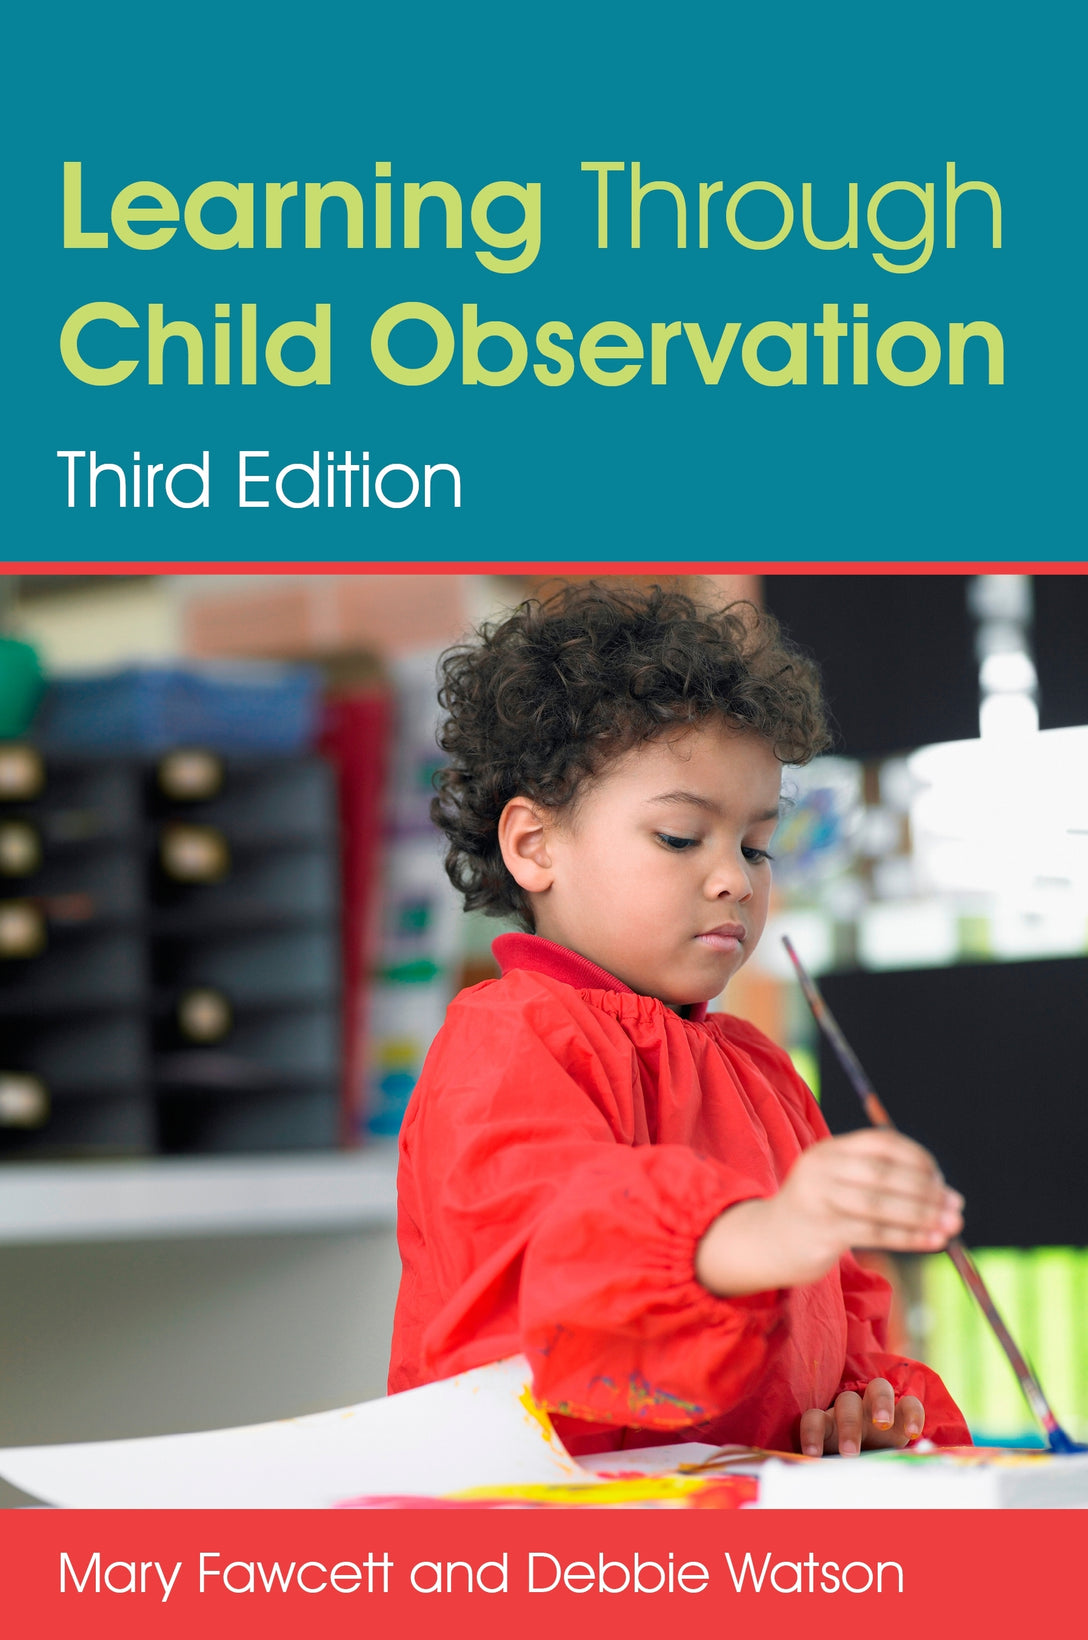 Learning Through Child Observation, Third Edition by Mary Fawcett, Debbie Watson